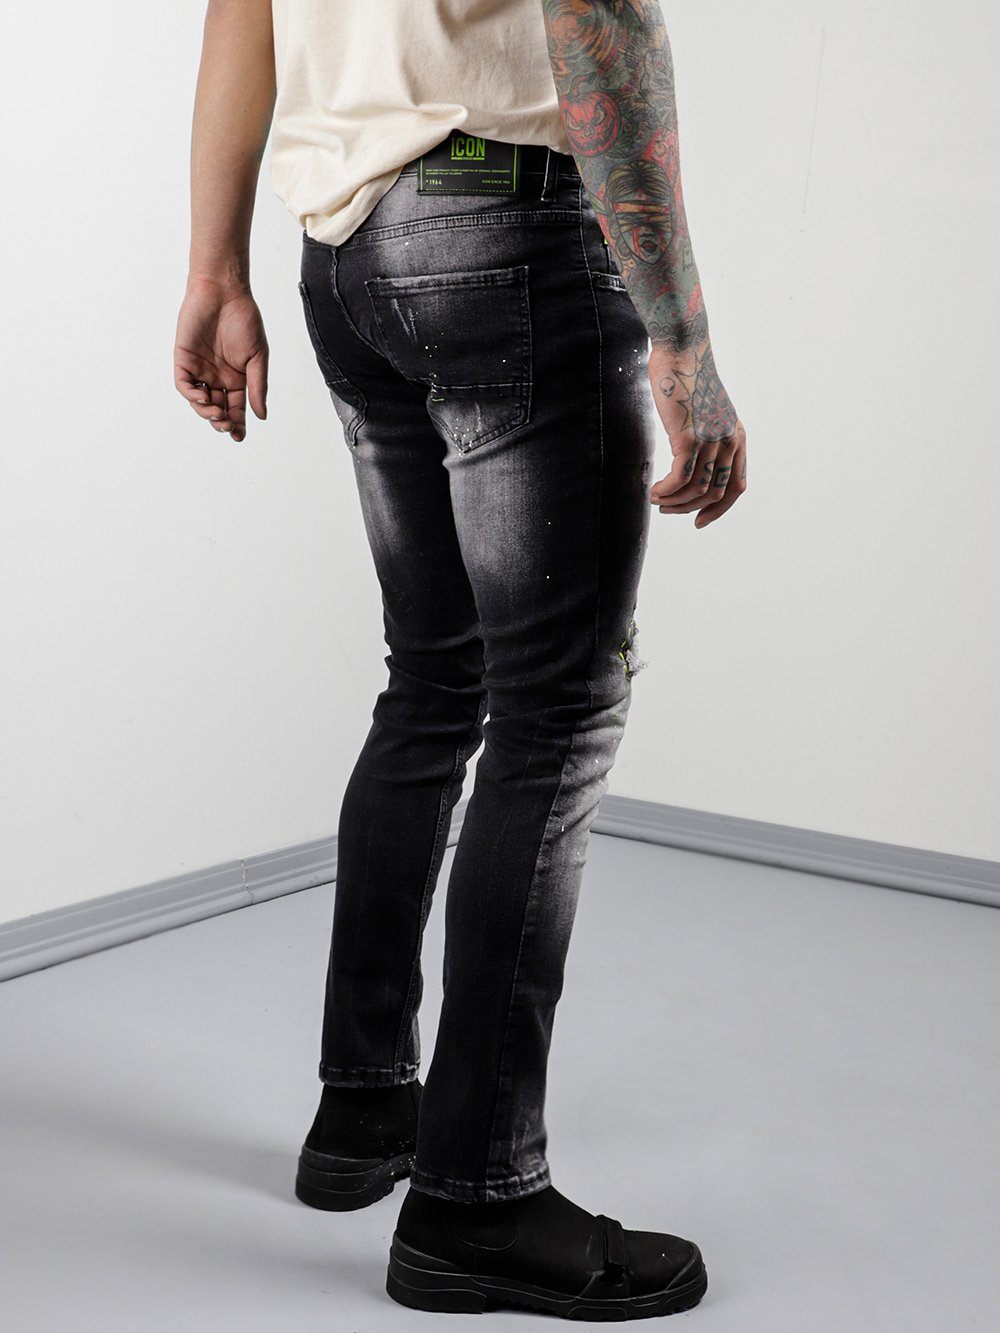 A man in NEON TALK jeans with tattoos standing in a room.